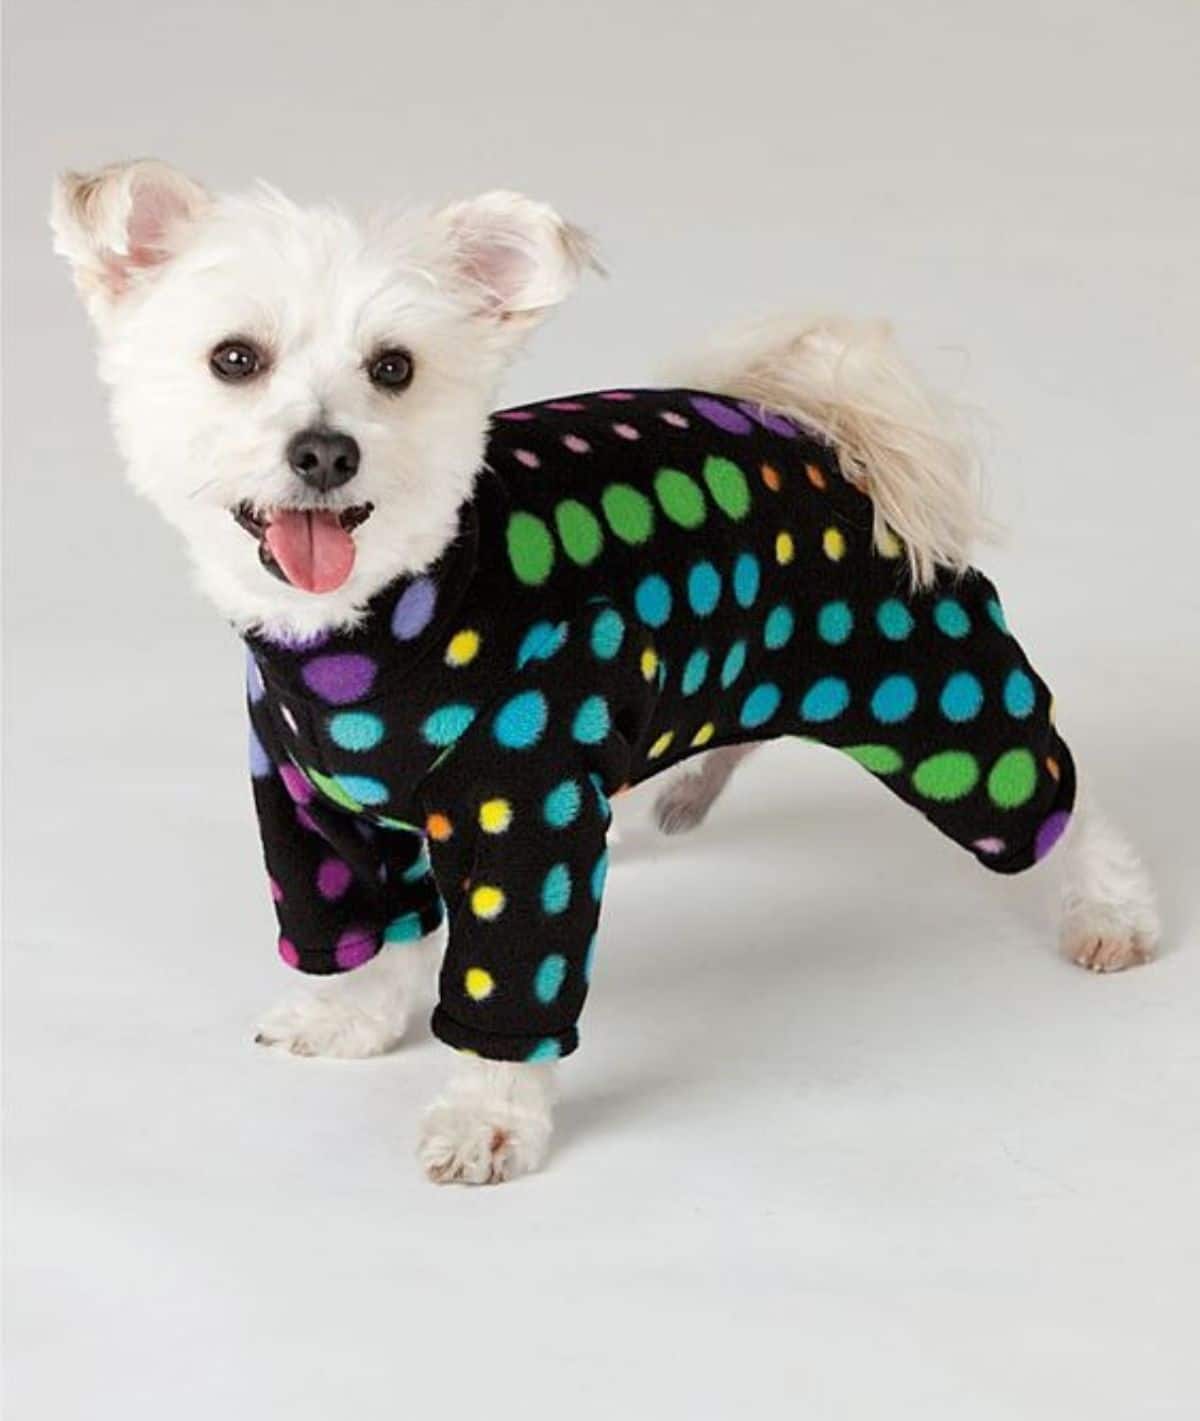 small fluffy white dog wearing a black onesie with colourful polka dots